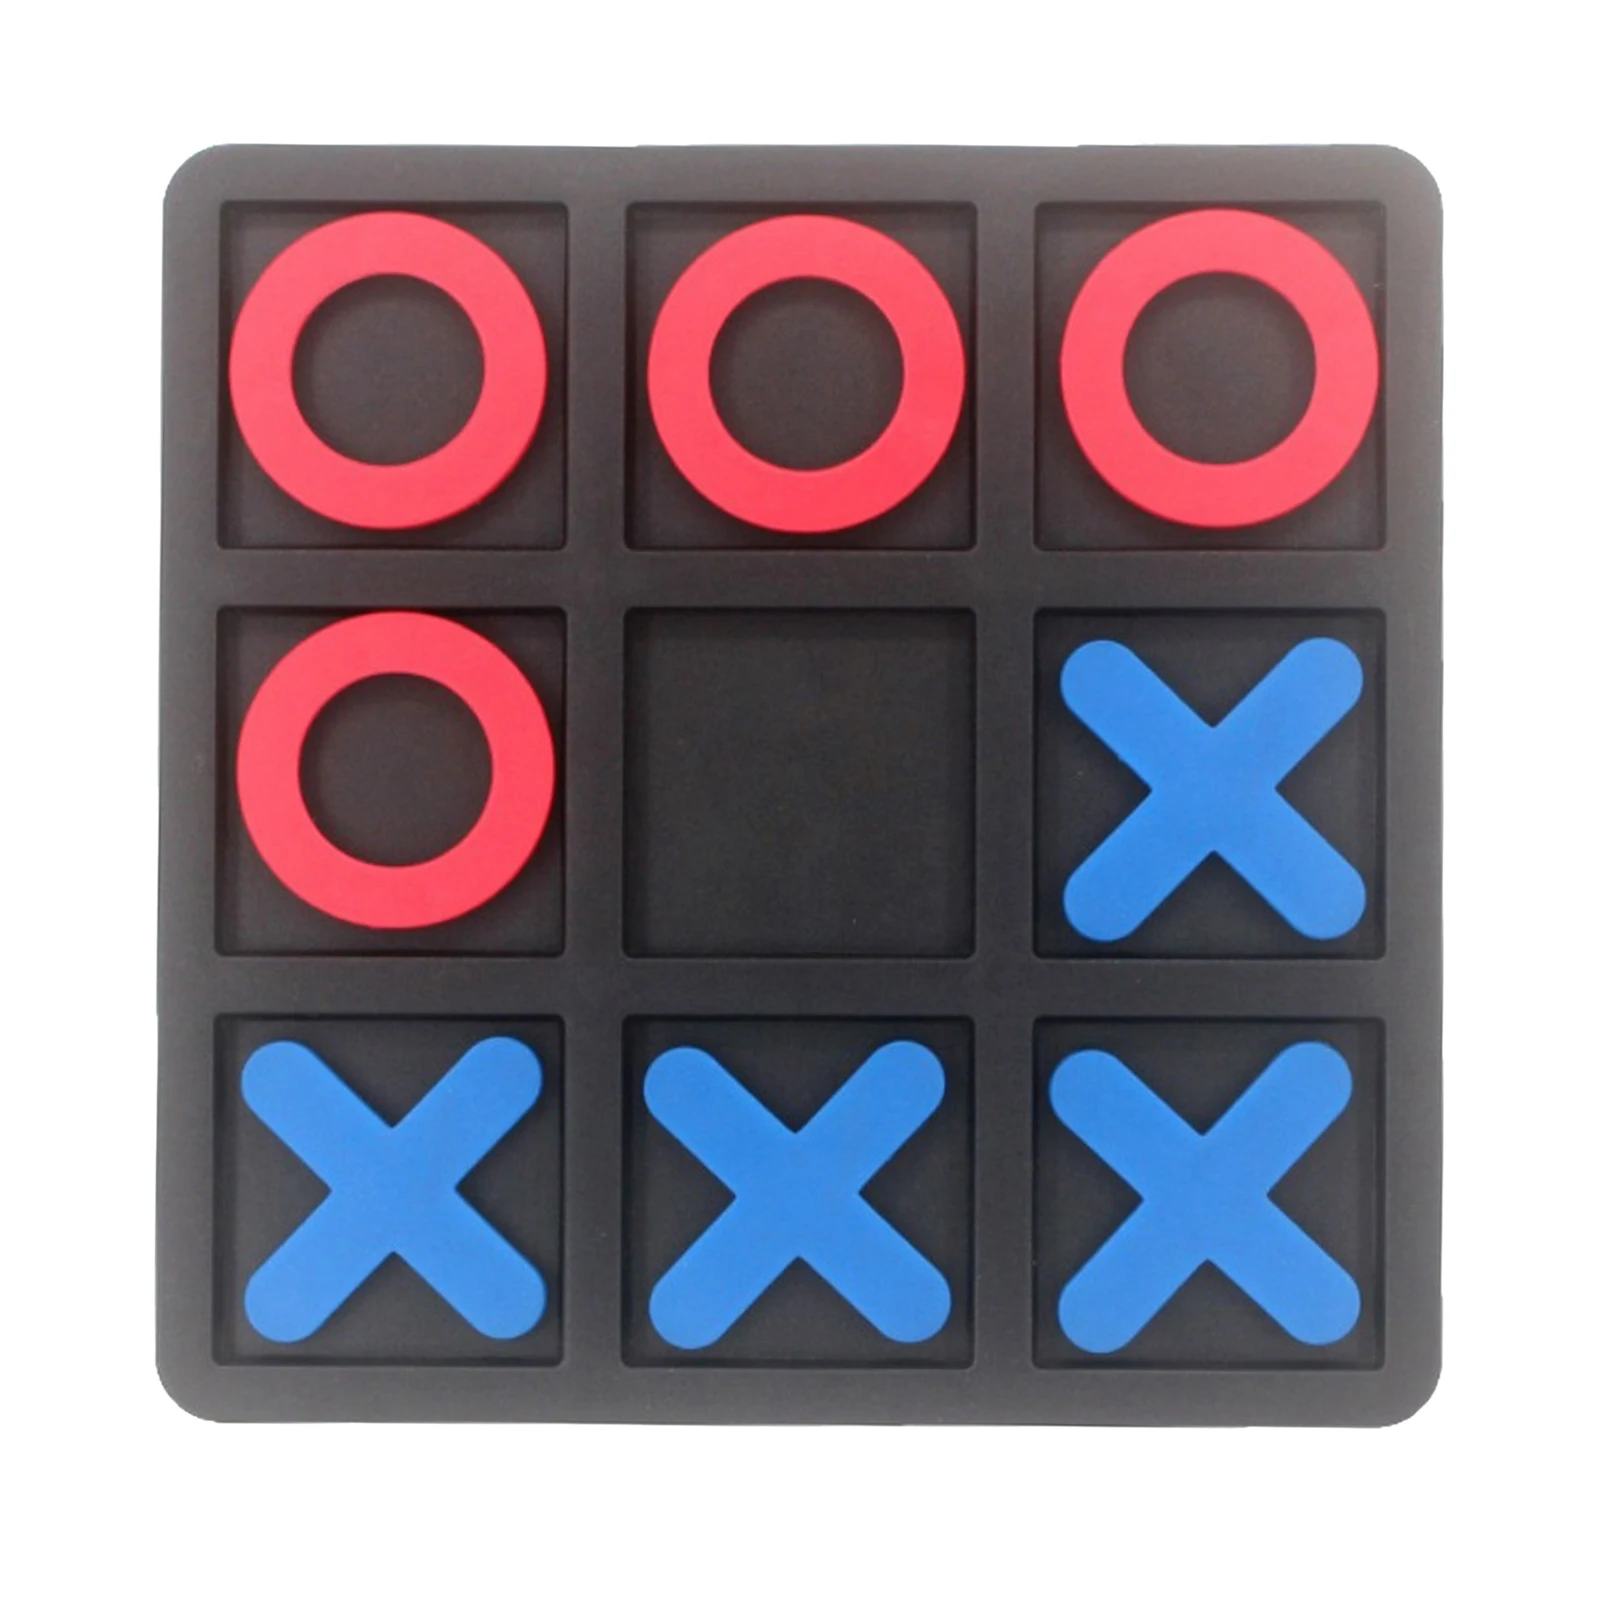 Tic Tac Toe noughts and crosses family travel game kids games 